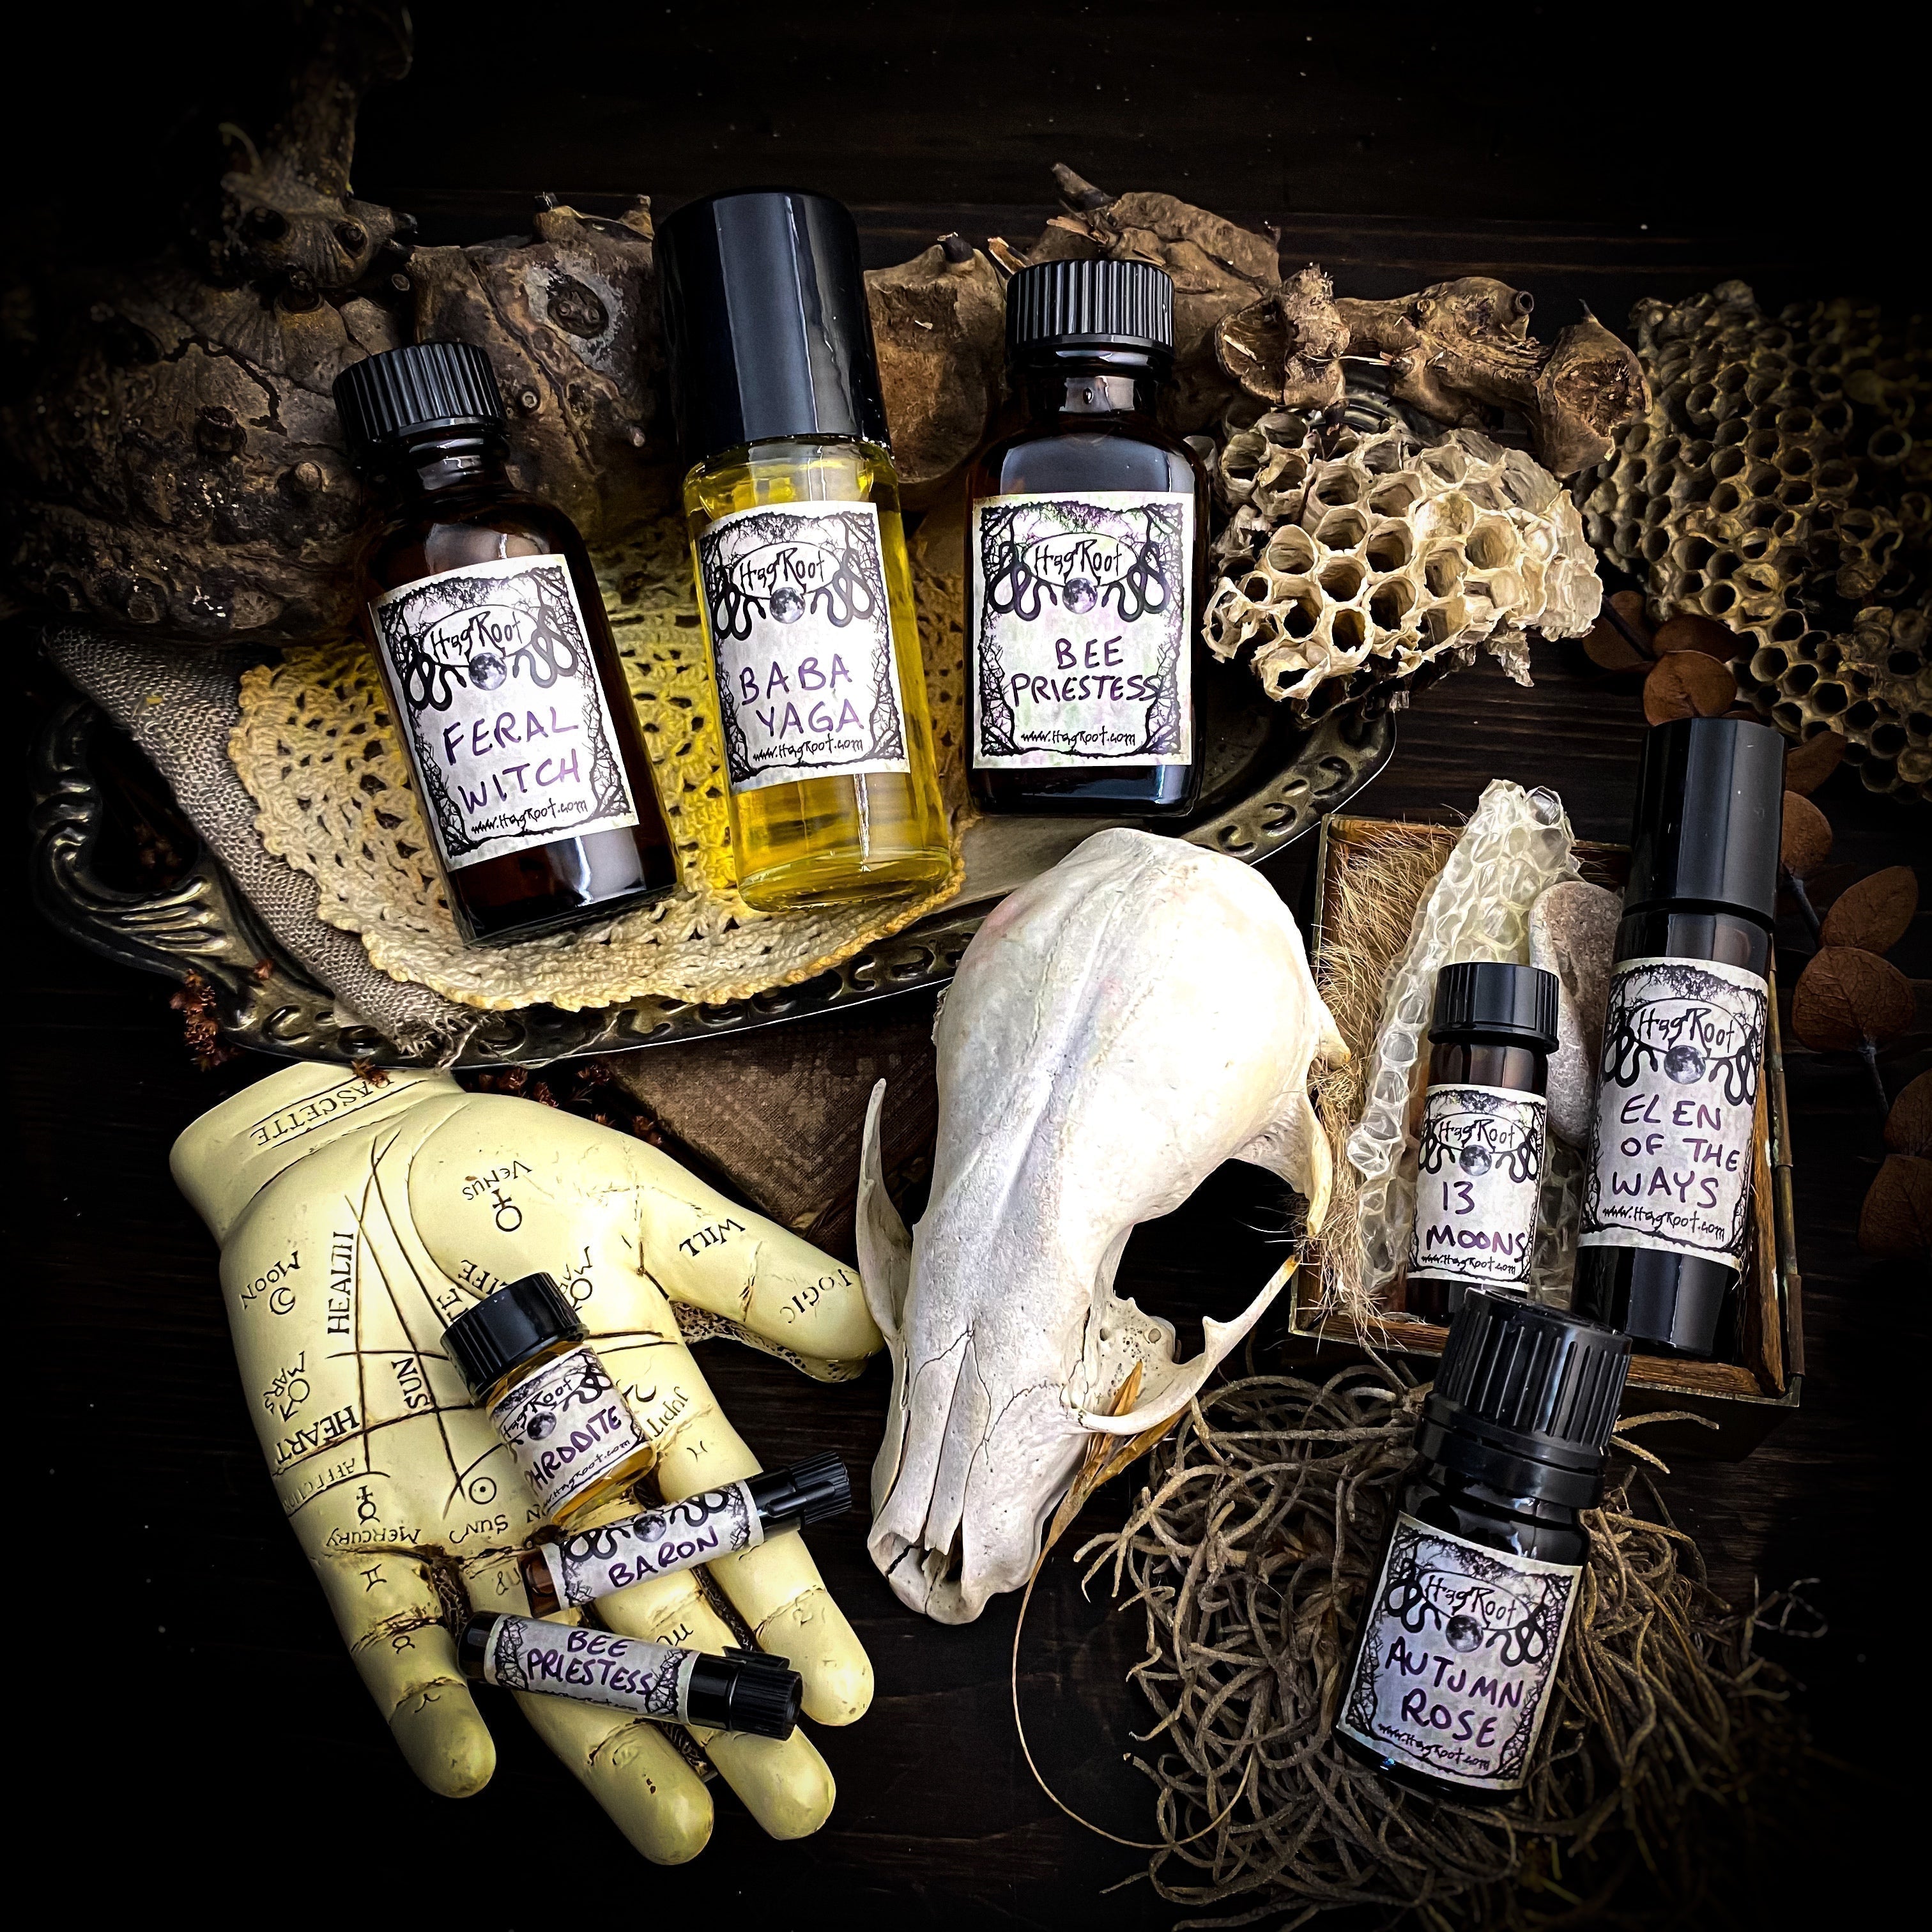 OF THE FOREST-(Ancient Evergreens, Forest Moss, Tree Sap, Bonfires and Wild Ferns)-Perfume, Cologne, Anointing, Ritual Oil